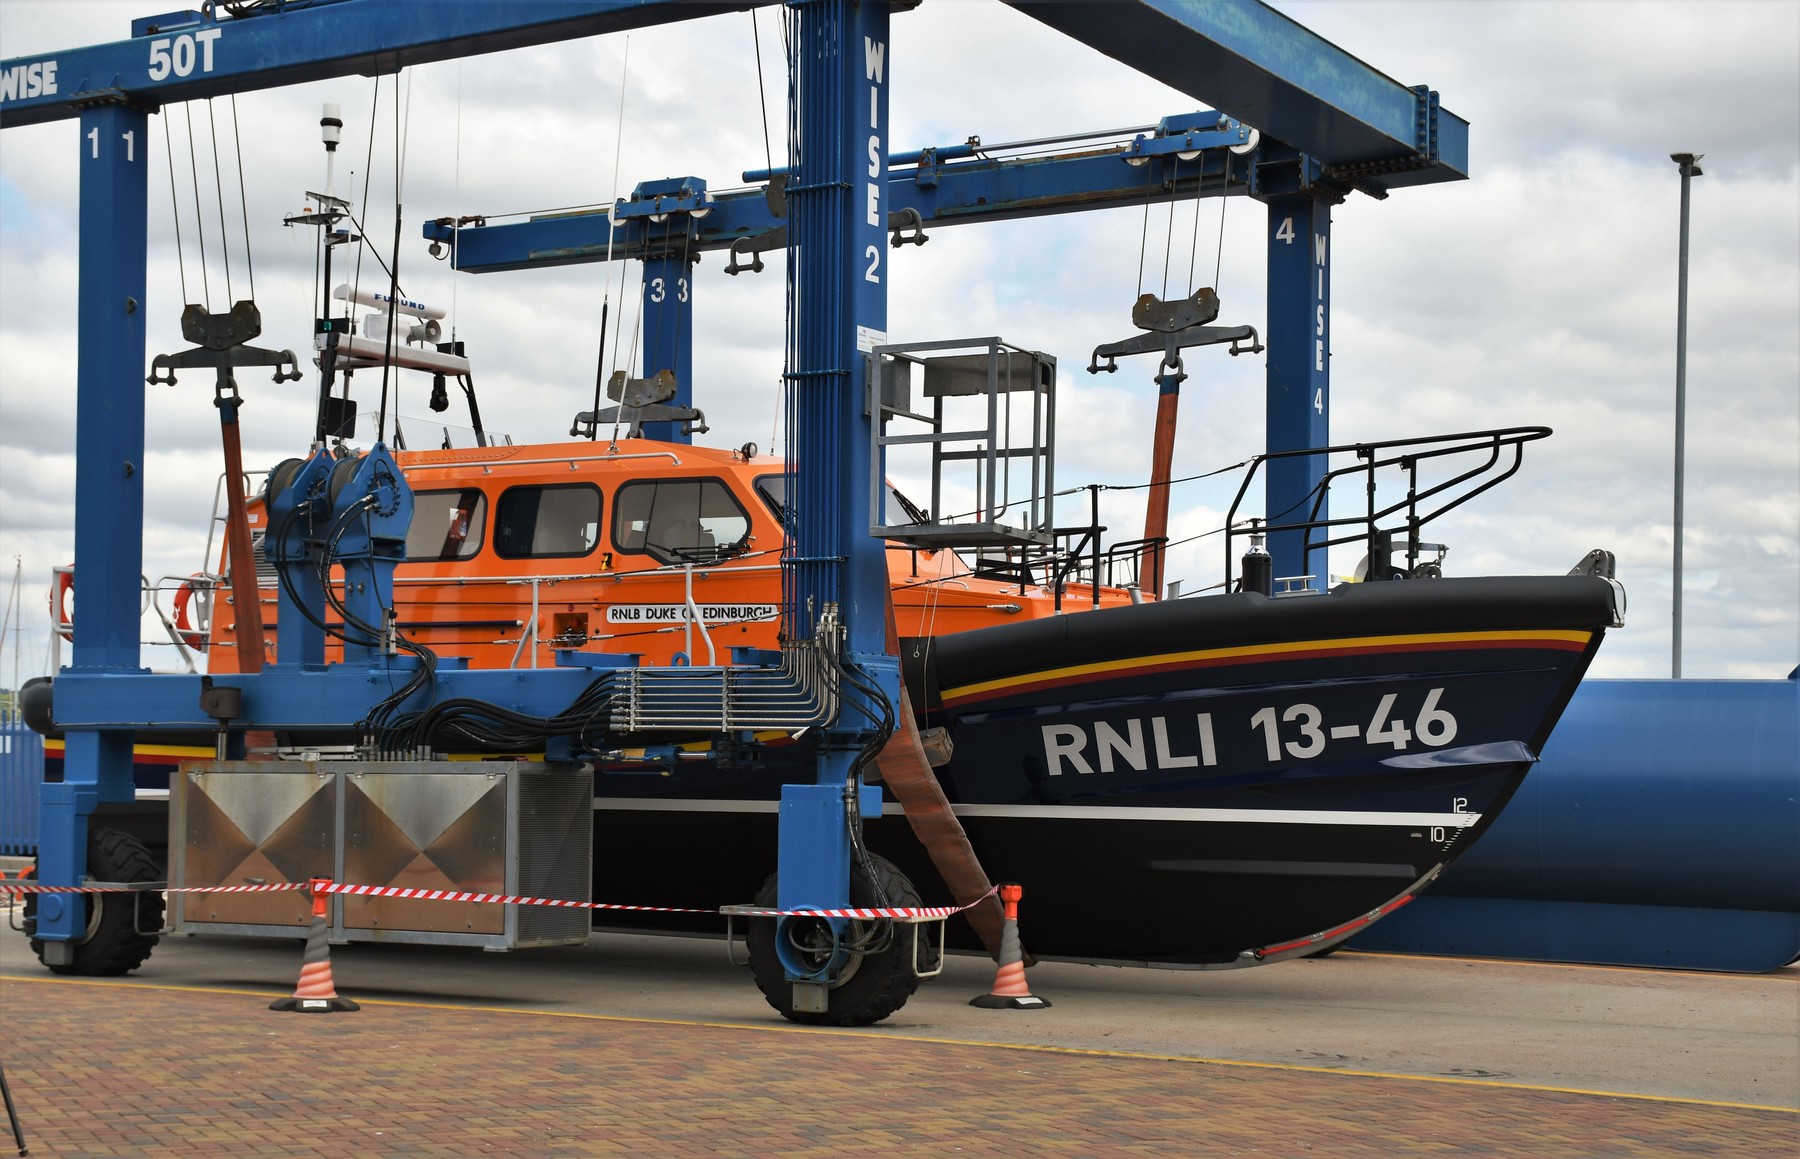 RNLB 13-46 'Duke of Edinburgh' waits to be lifted into the water at Poole